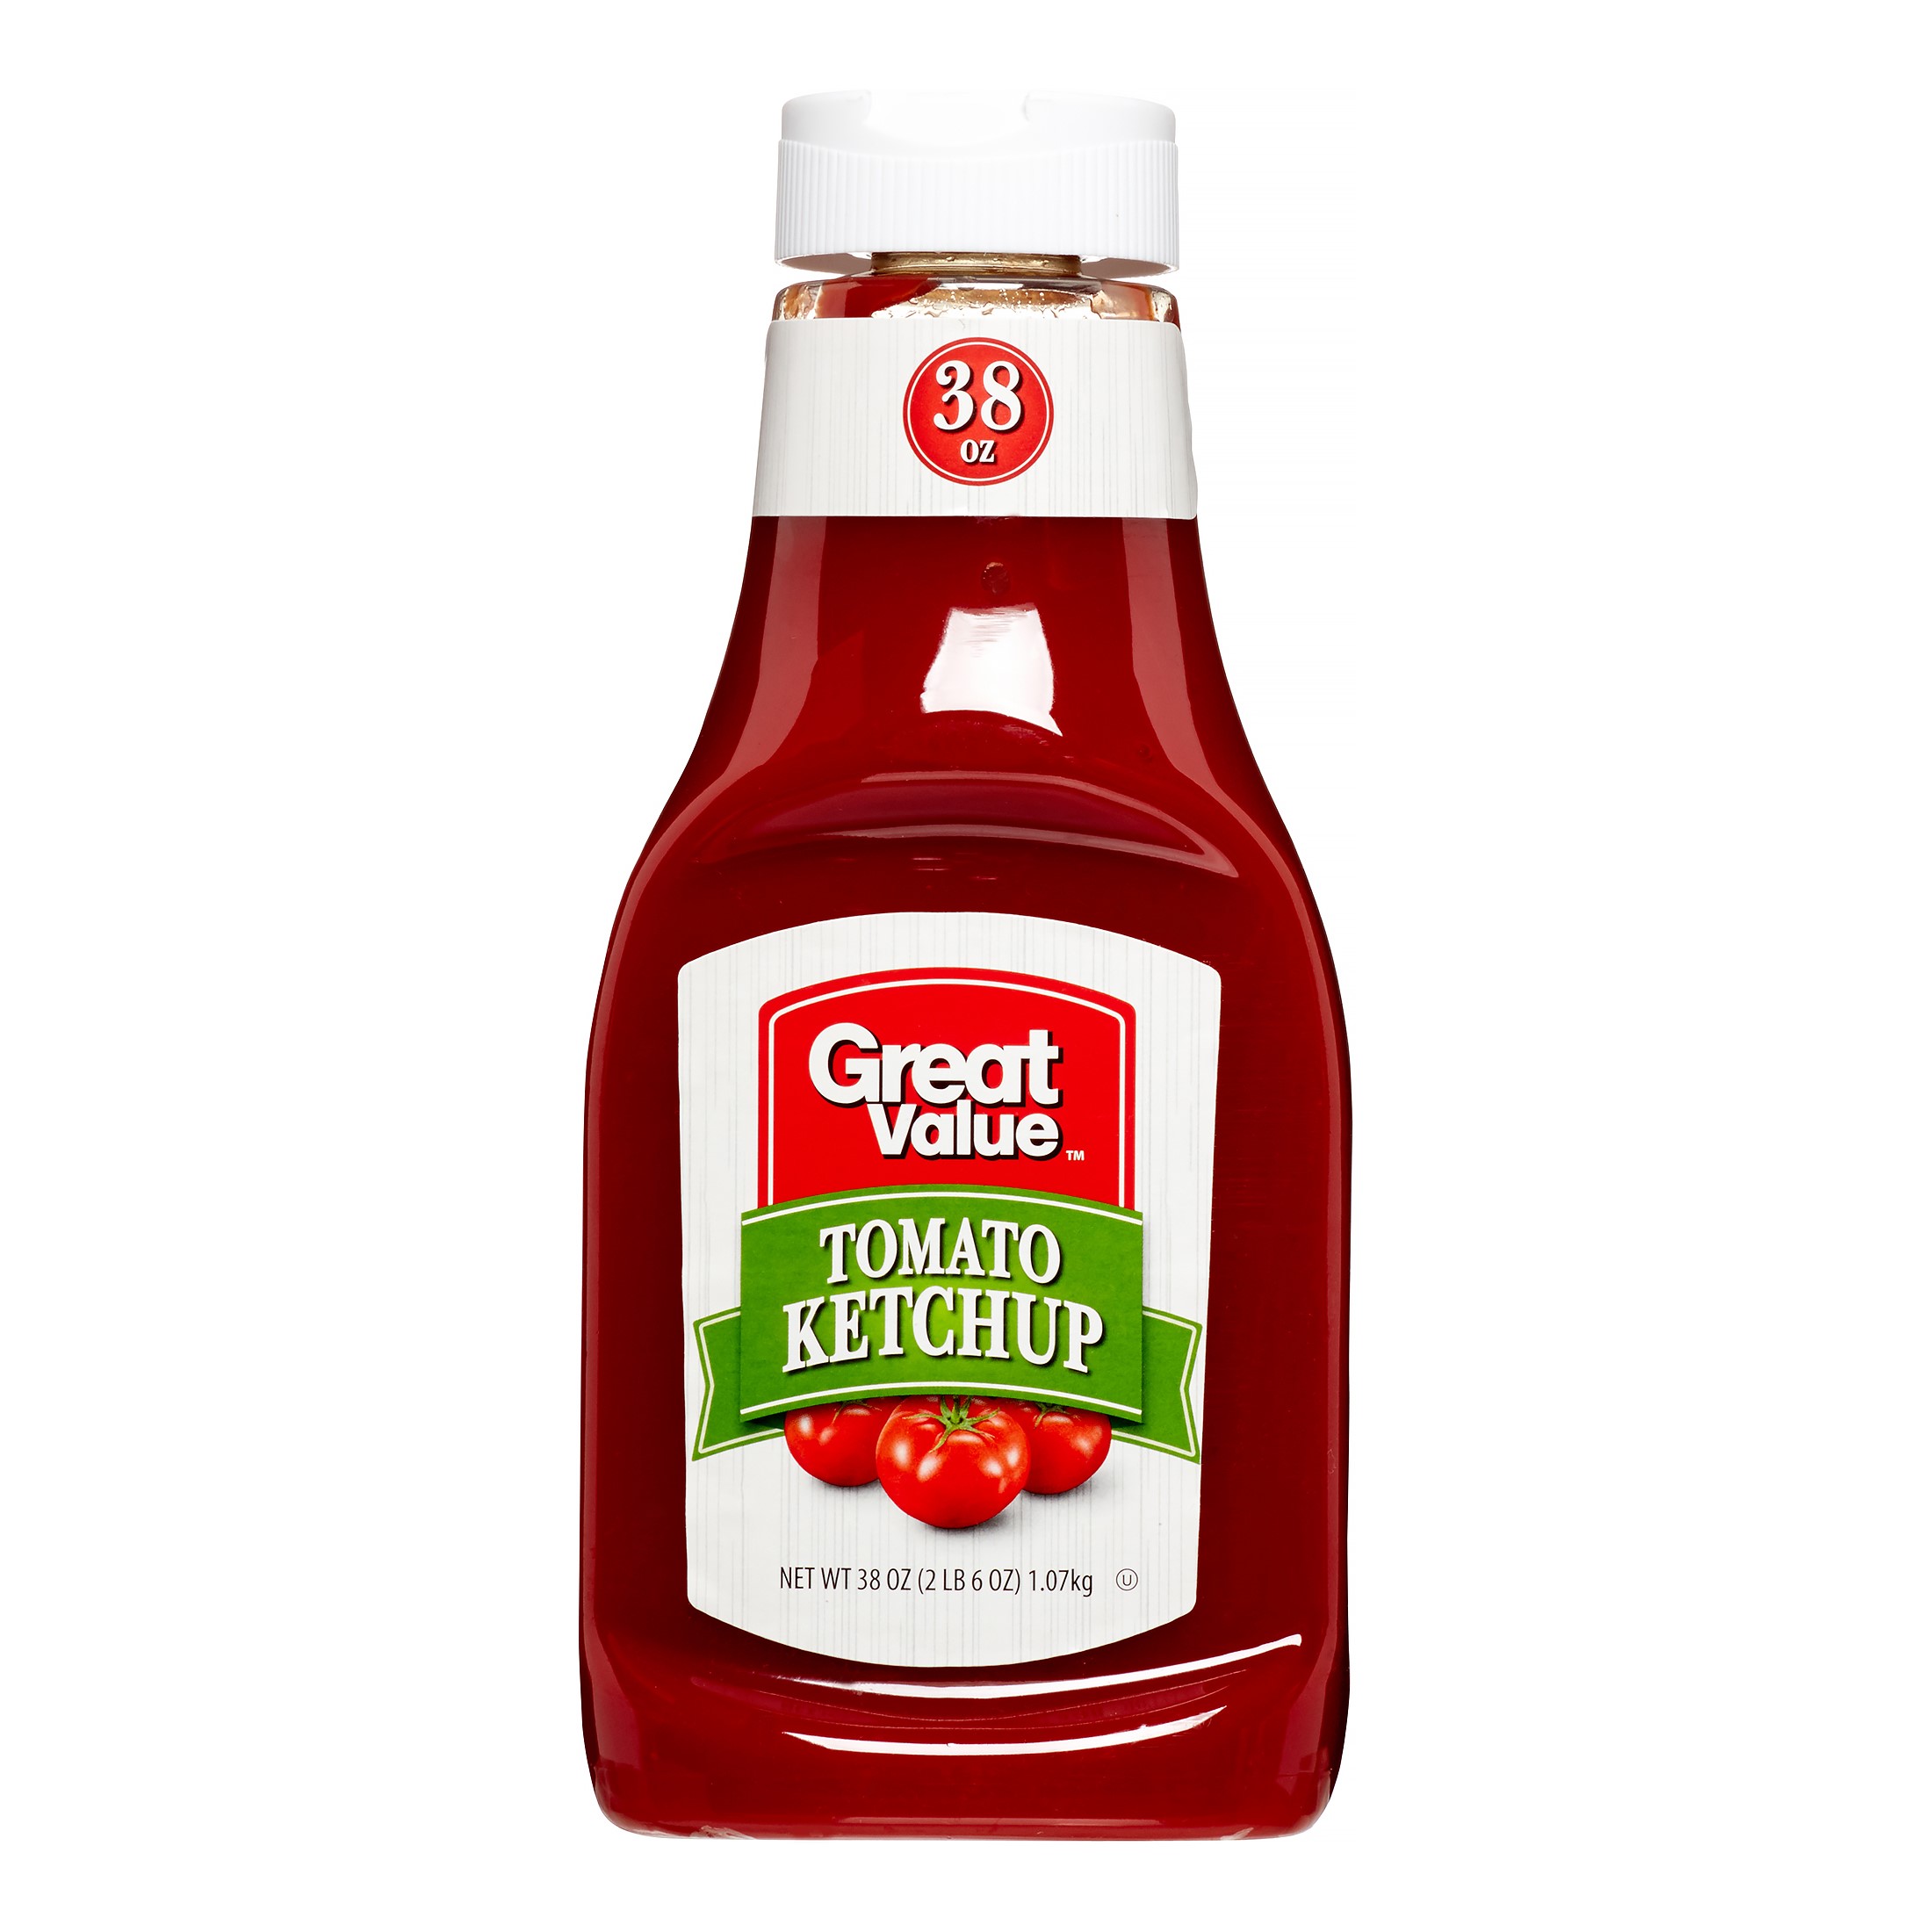 (4 Pack) Great Value Tomato Ketchup, 38 Oz Image